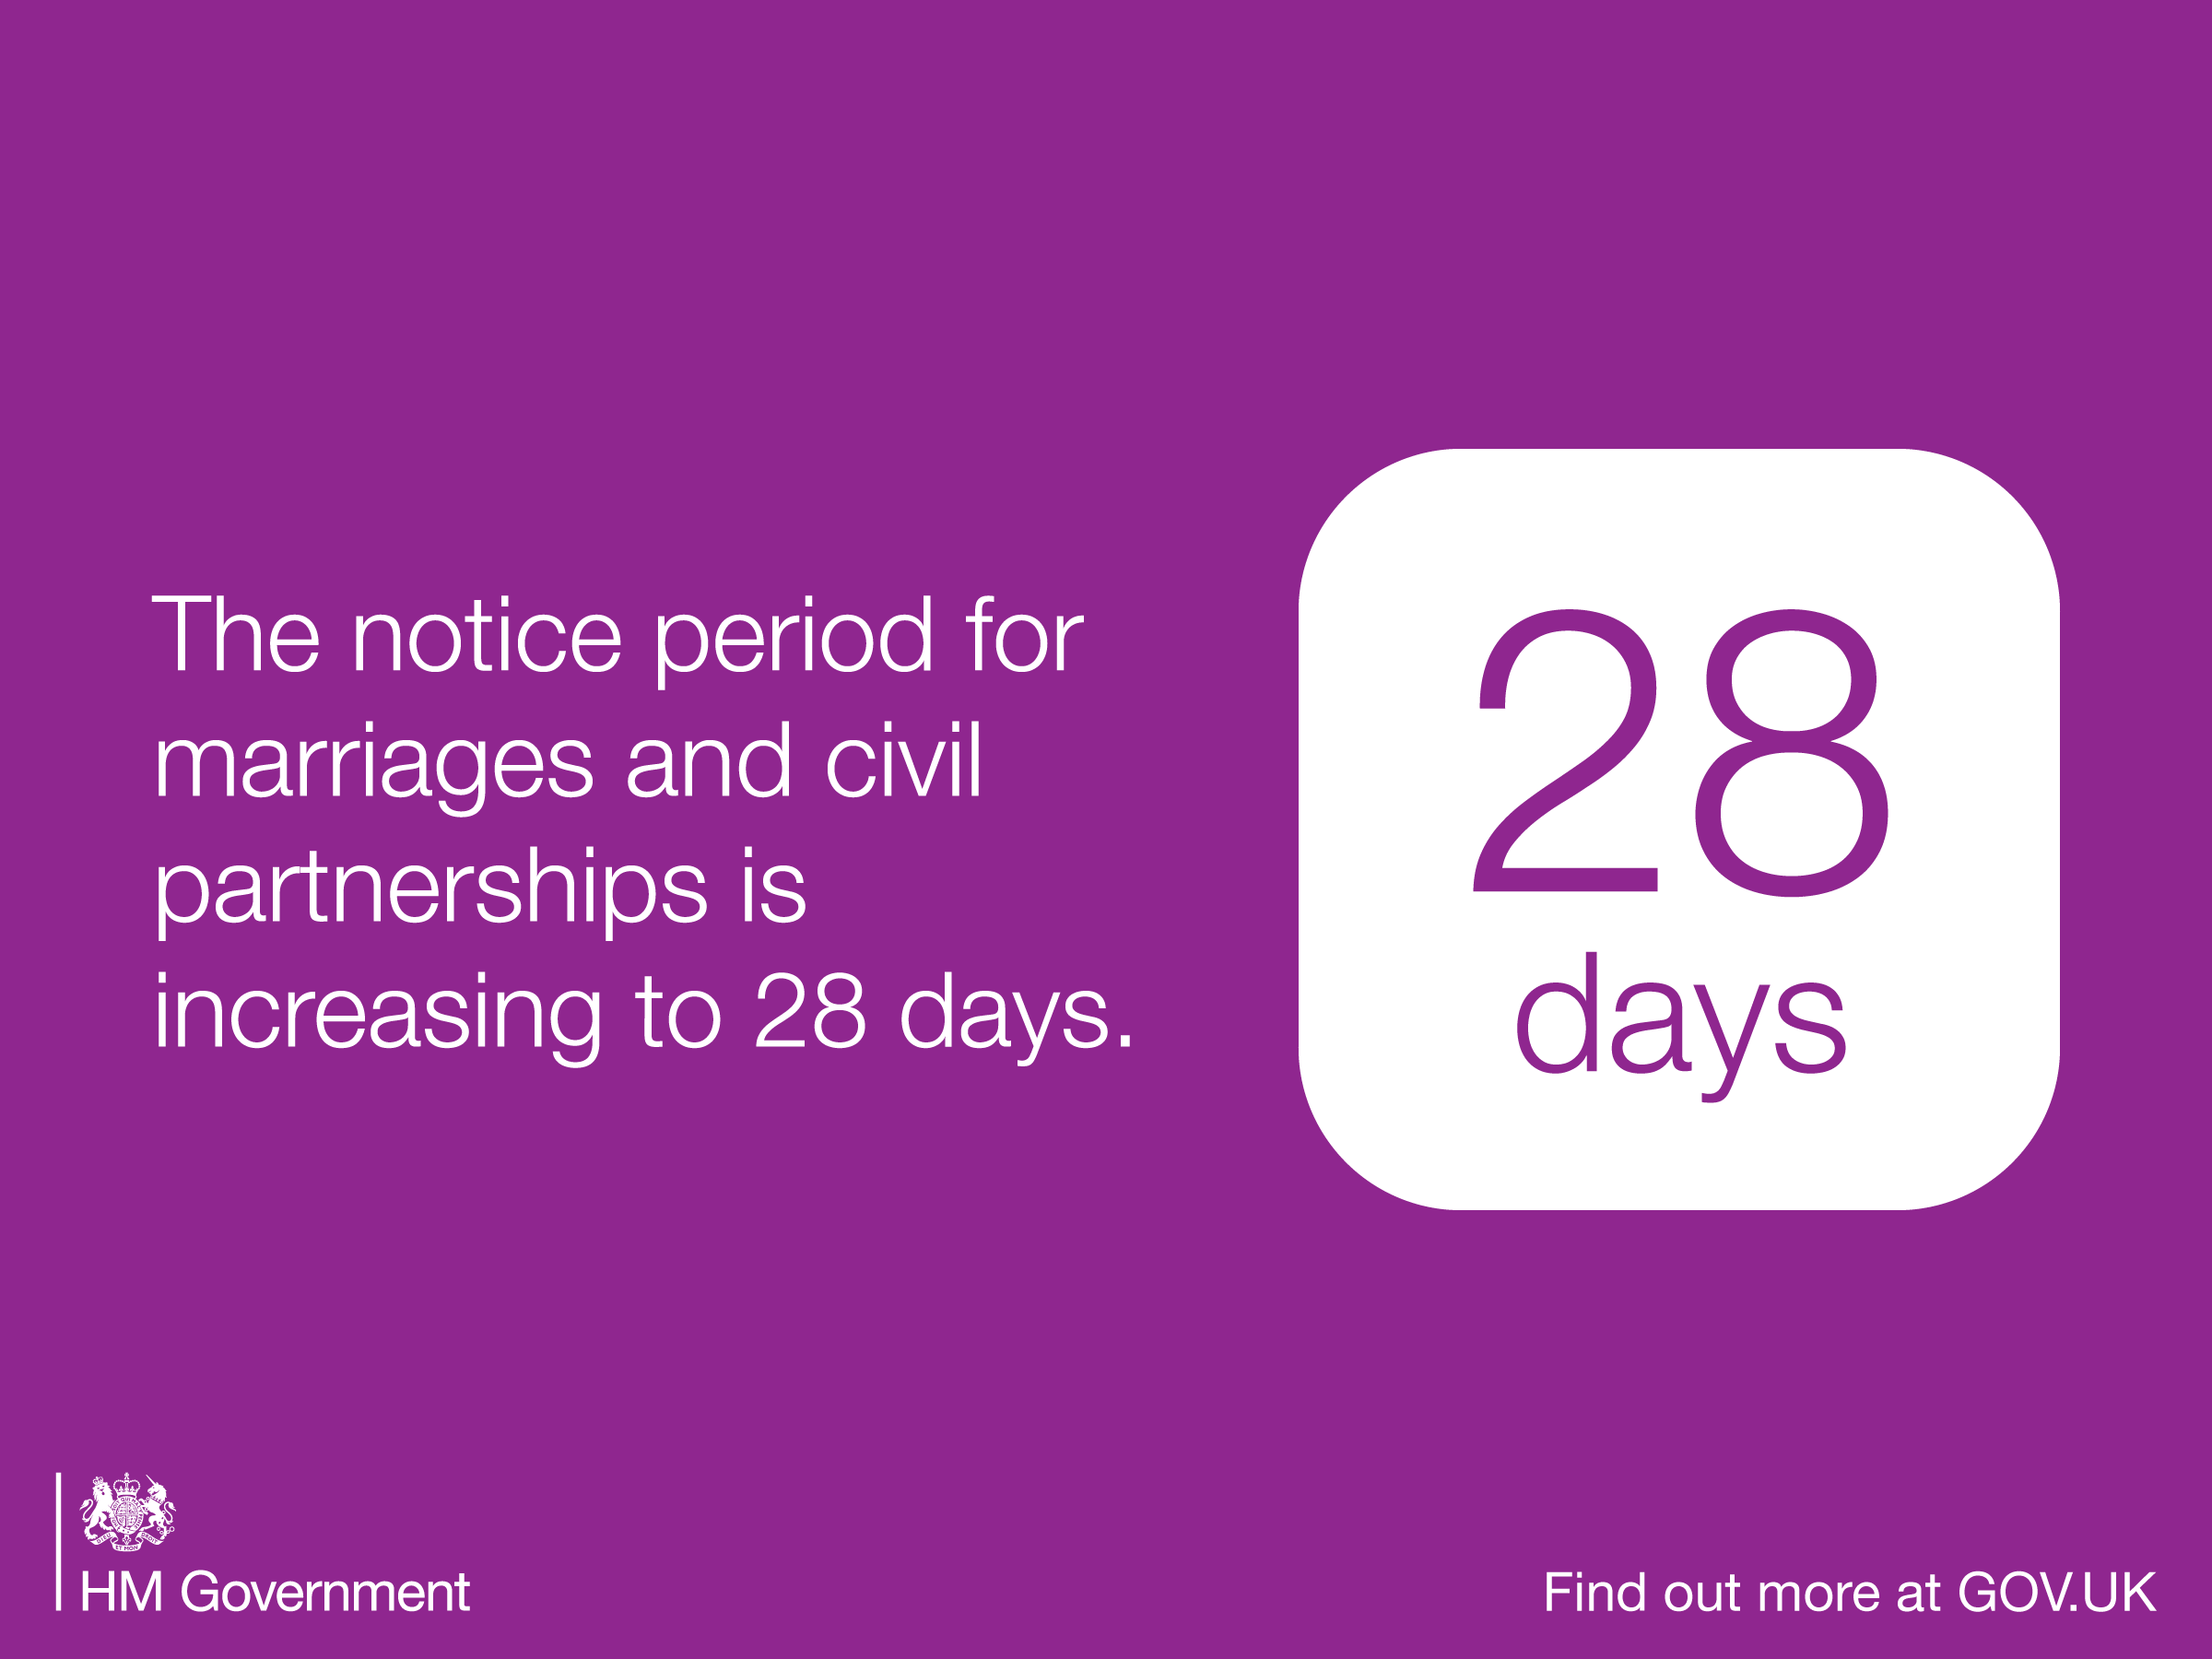 Changes to the Marriage Notice Period